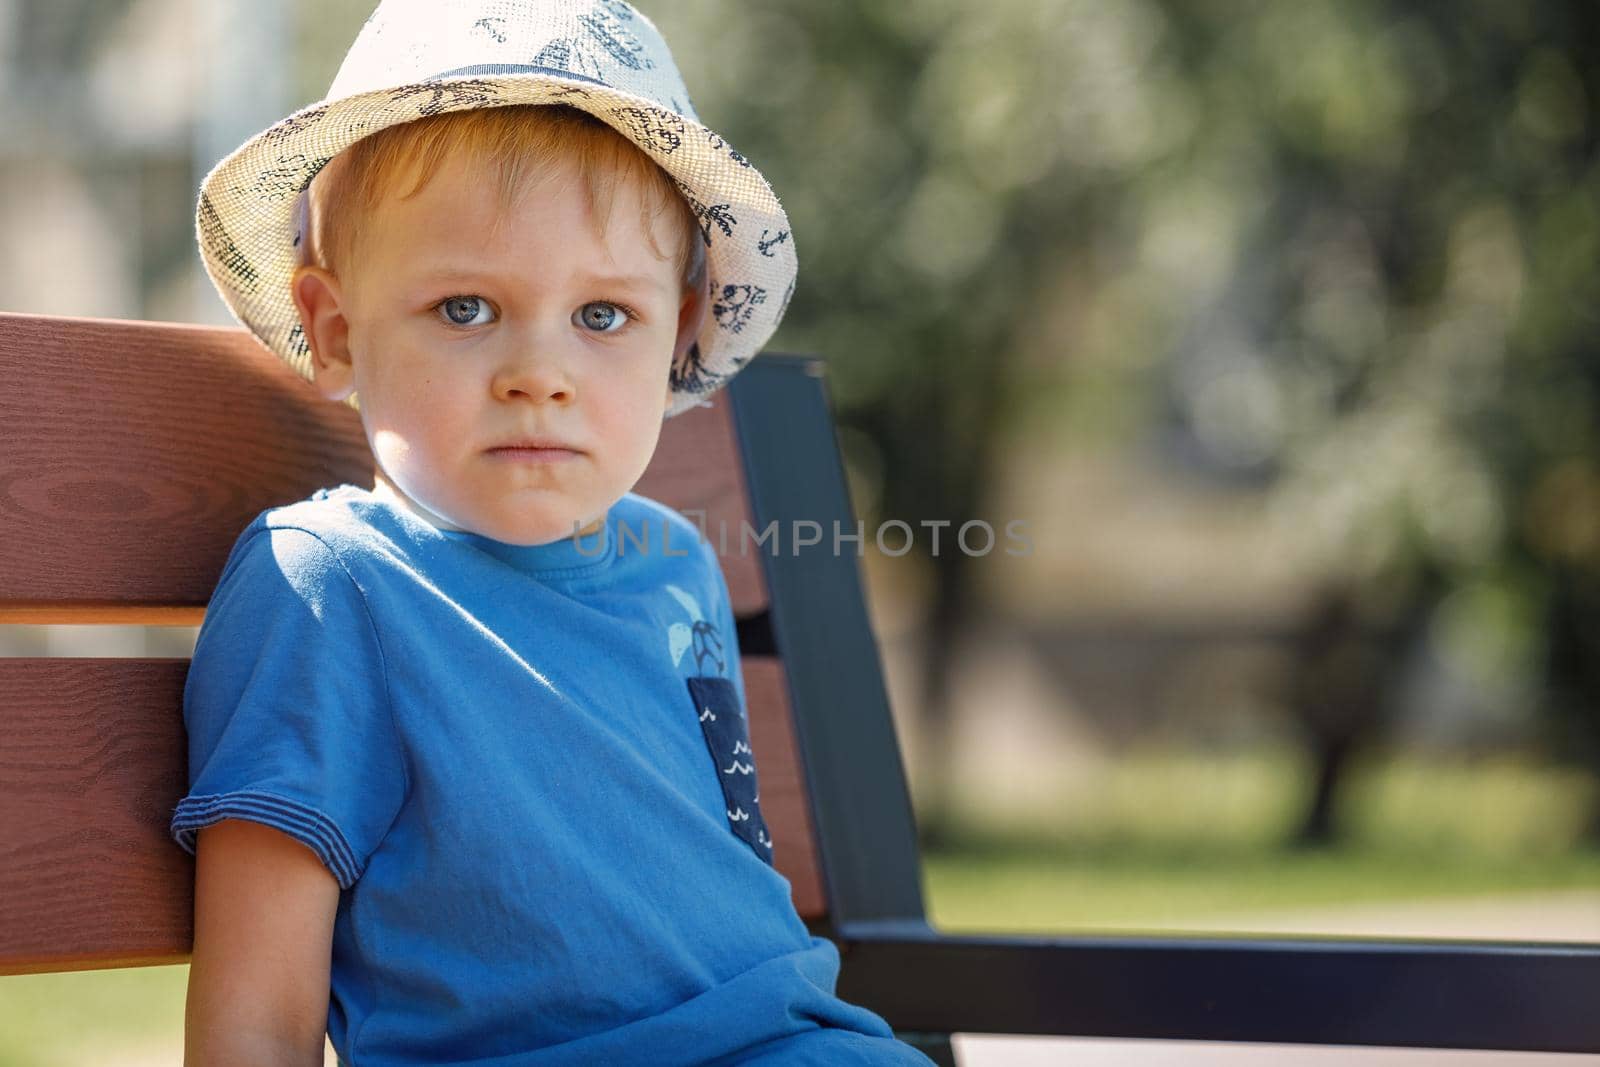 Portrait of a cute boy with a white hat and a blue shirt. A child sits on a nat bench in the park and looks straight at the camera